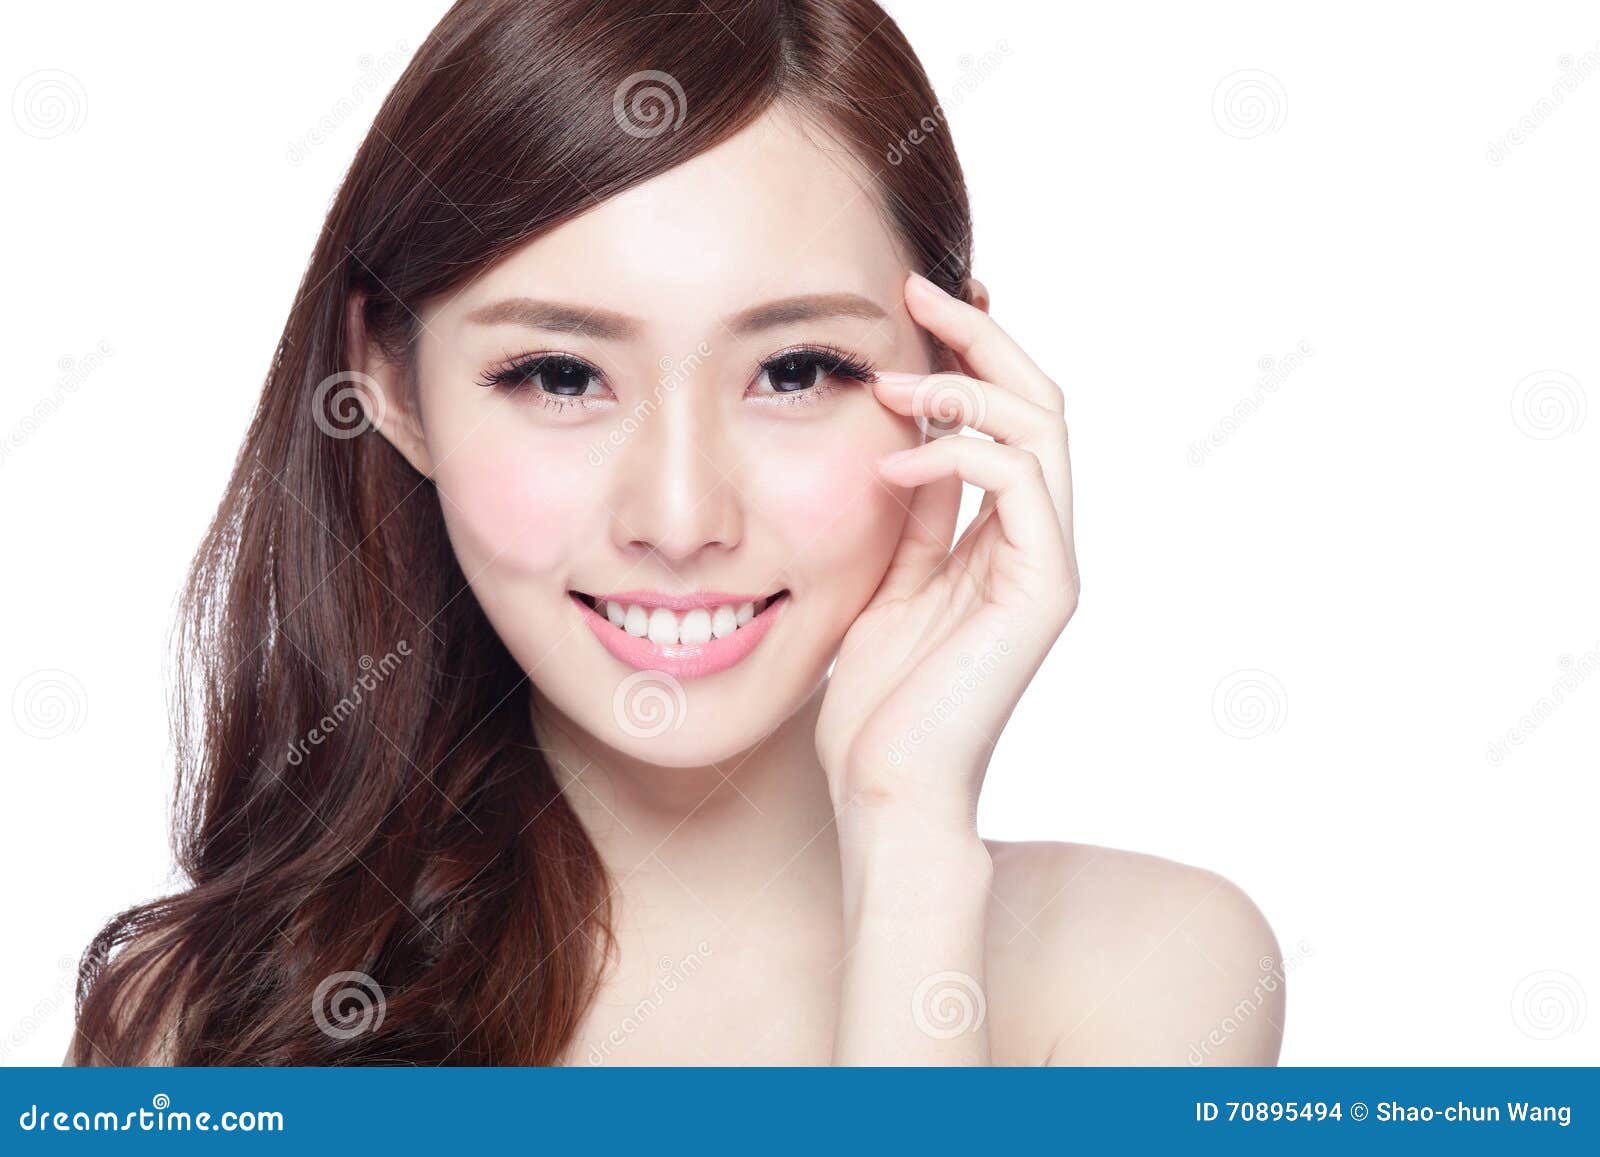 beauty woman with charming smile